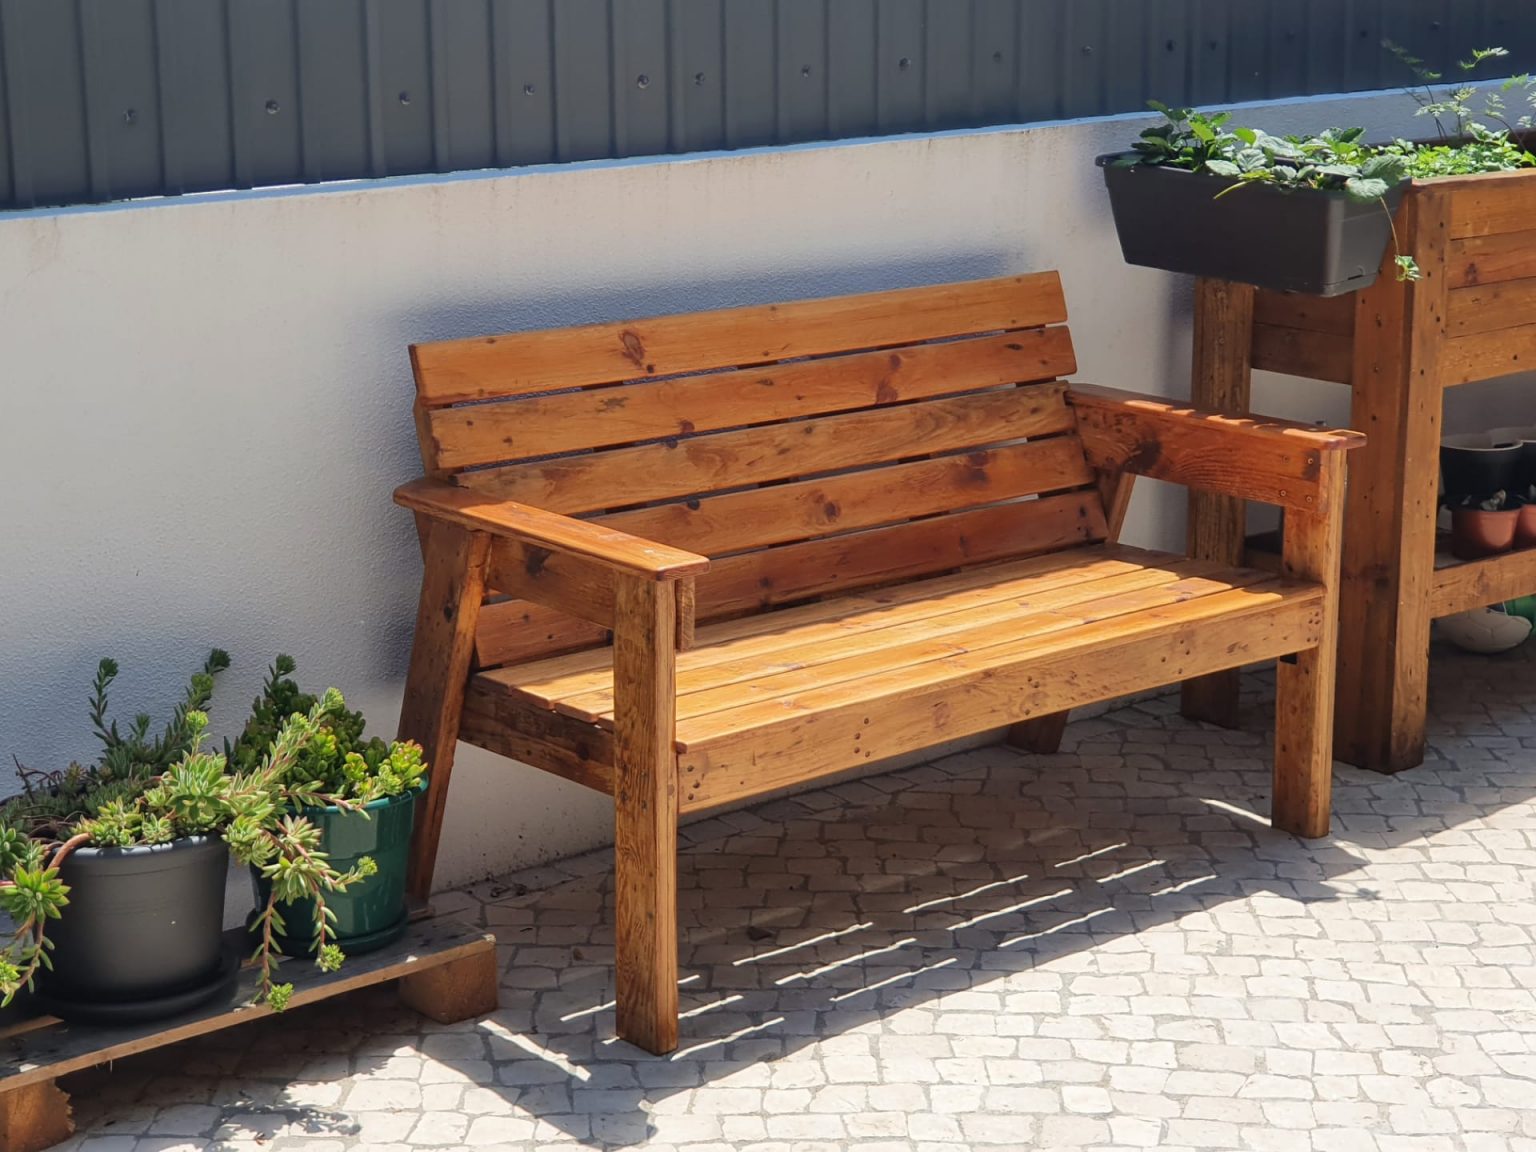 2x4-garden-bench-howtospecialist-how-to-build-step-by-step-diy-plans